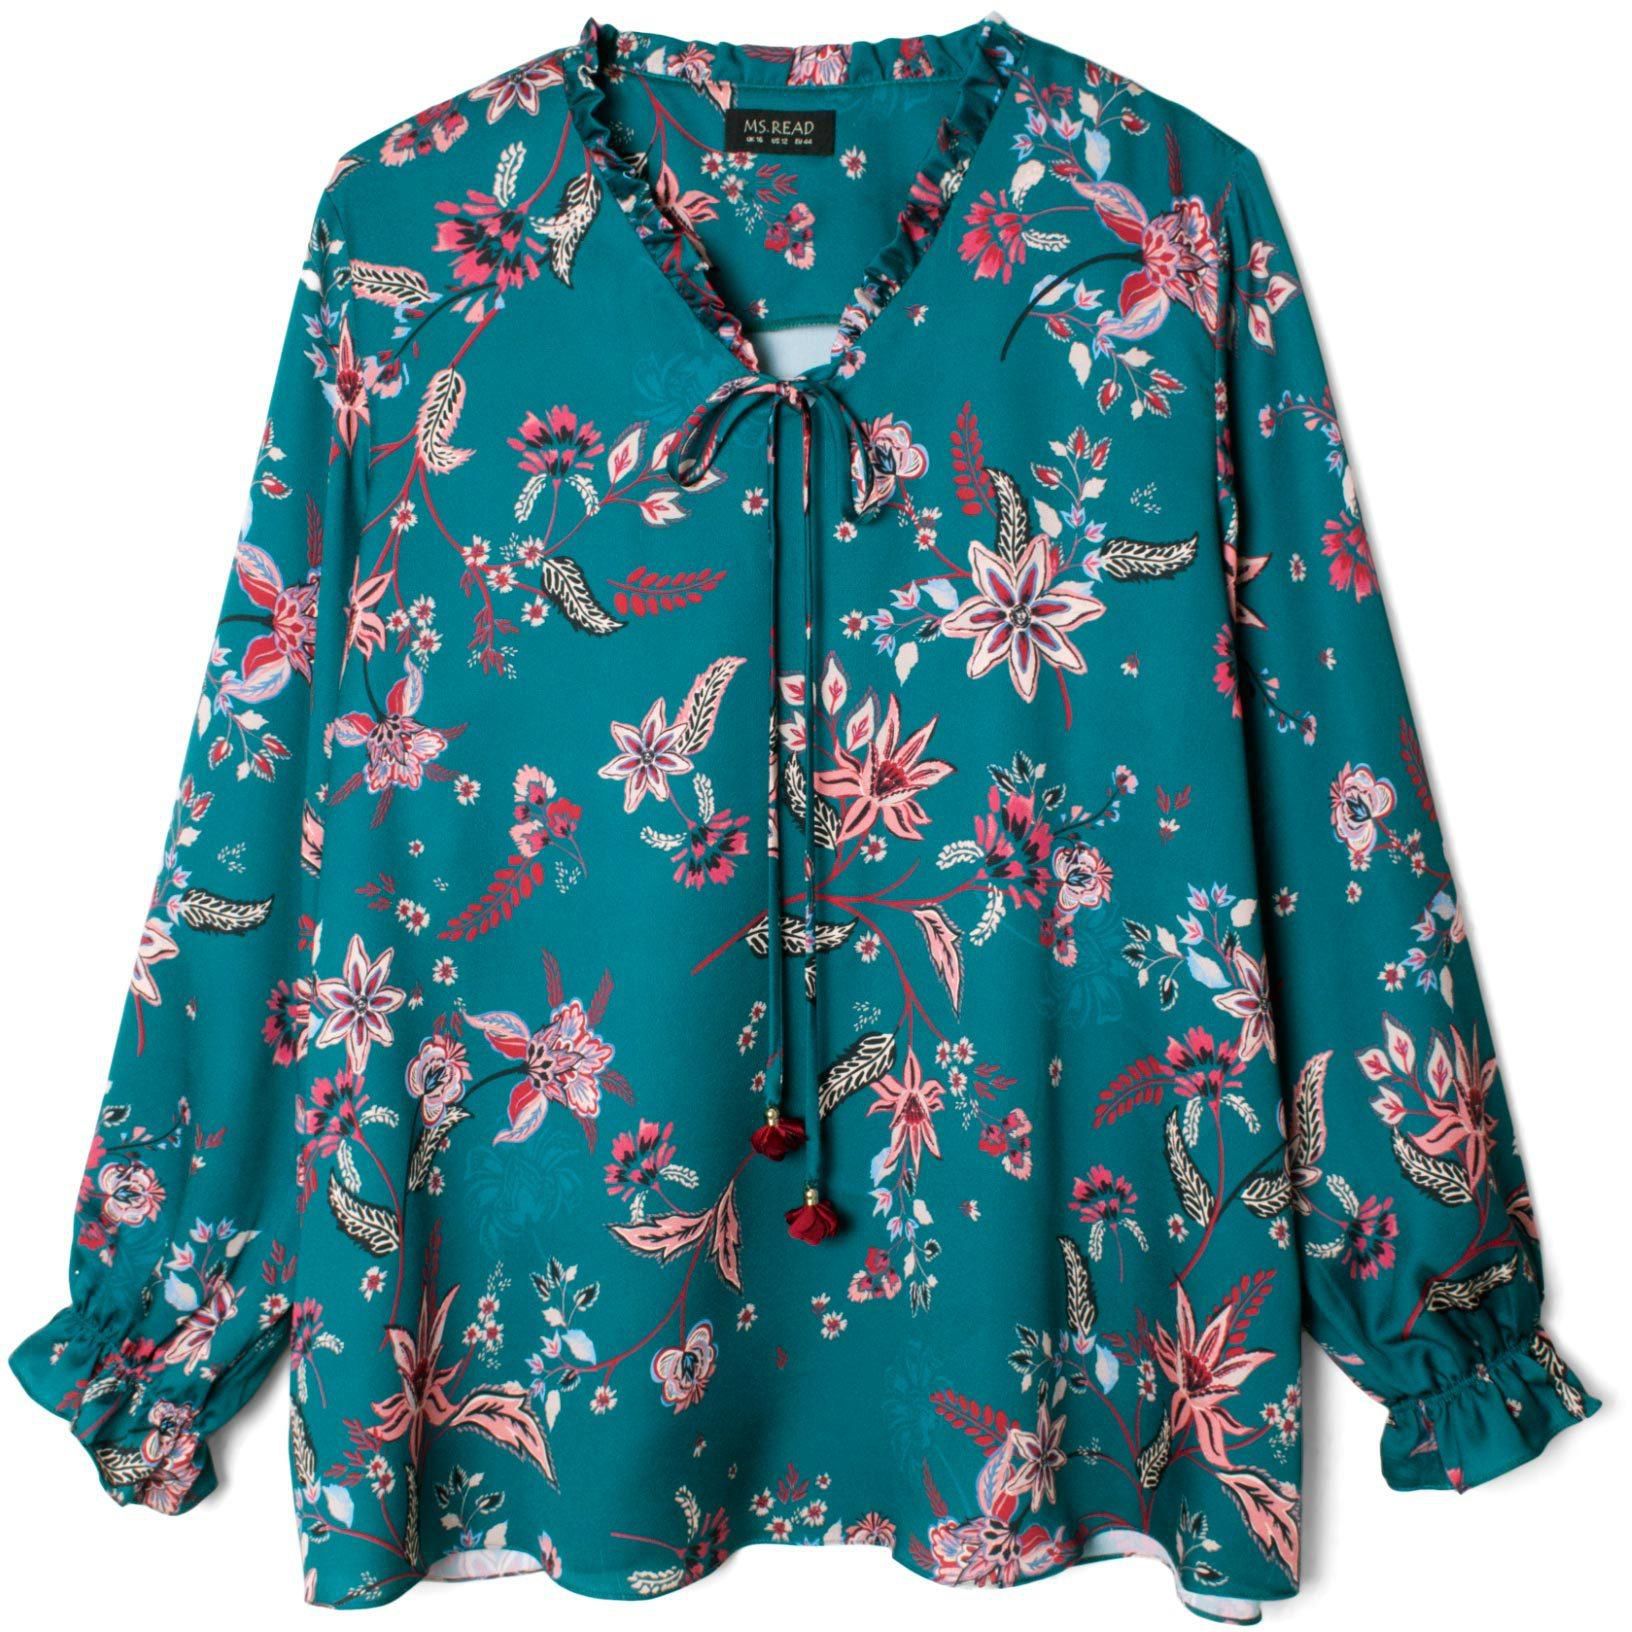 Printed Peasant Top Long Puffed Sleeve - 6 Sizes (Green)